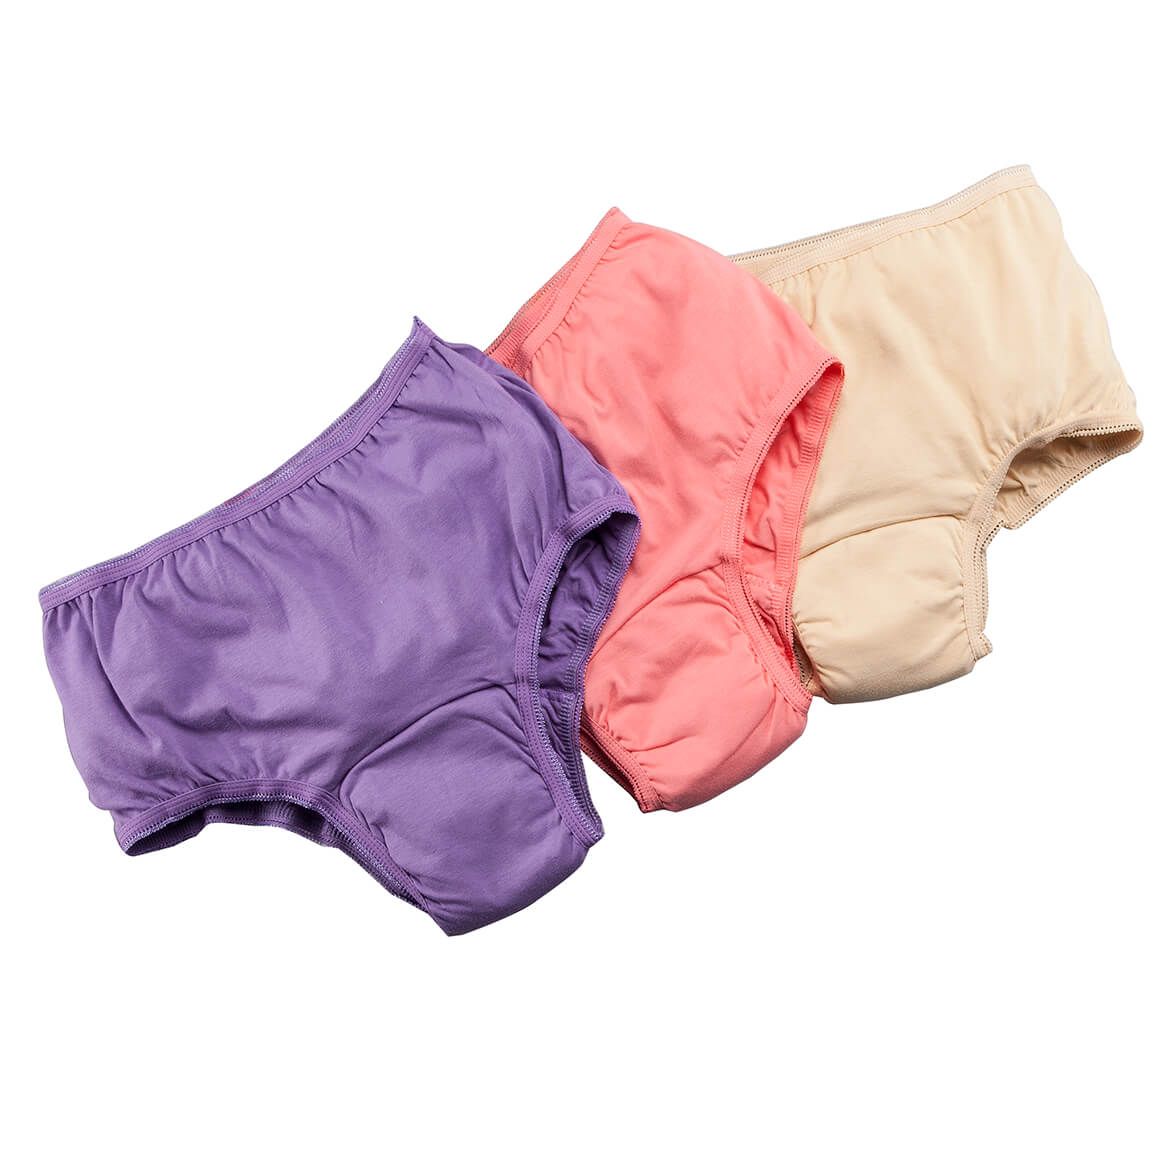 Women's 20 oz. Incontinence Briefs – Assorted 3-Pack - Easy Comforts